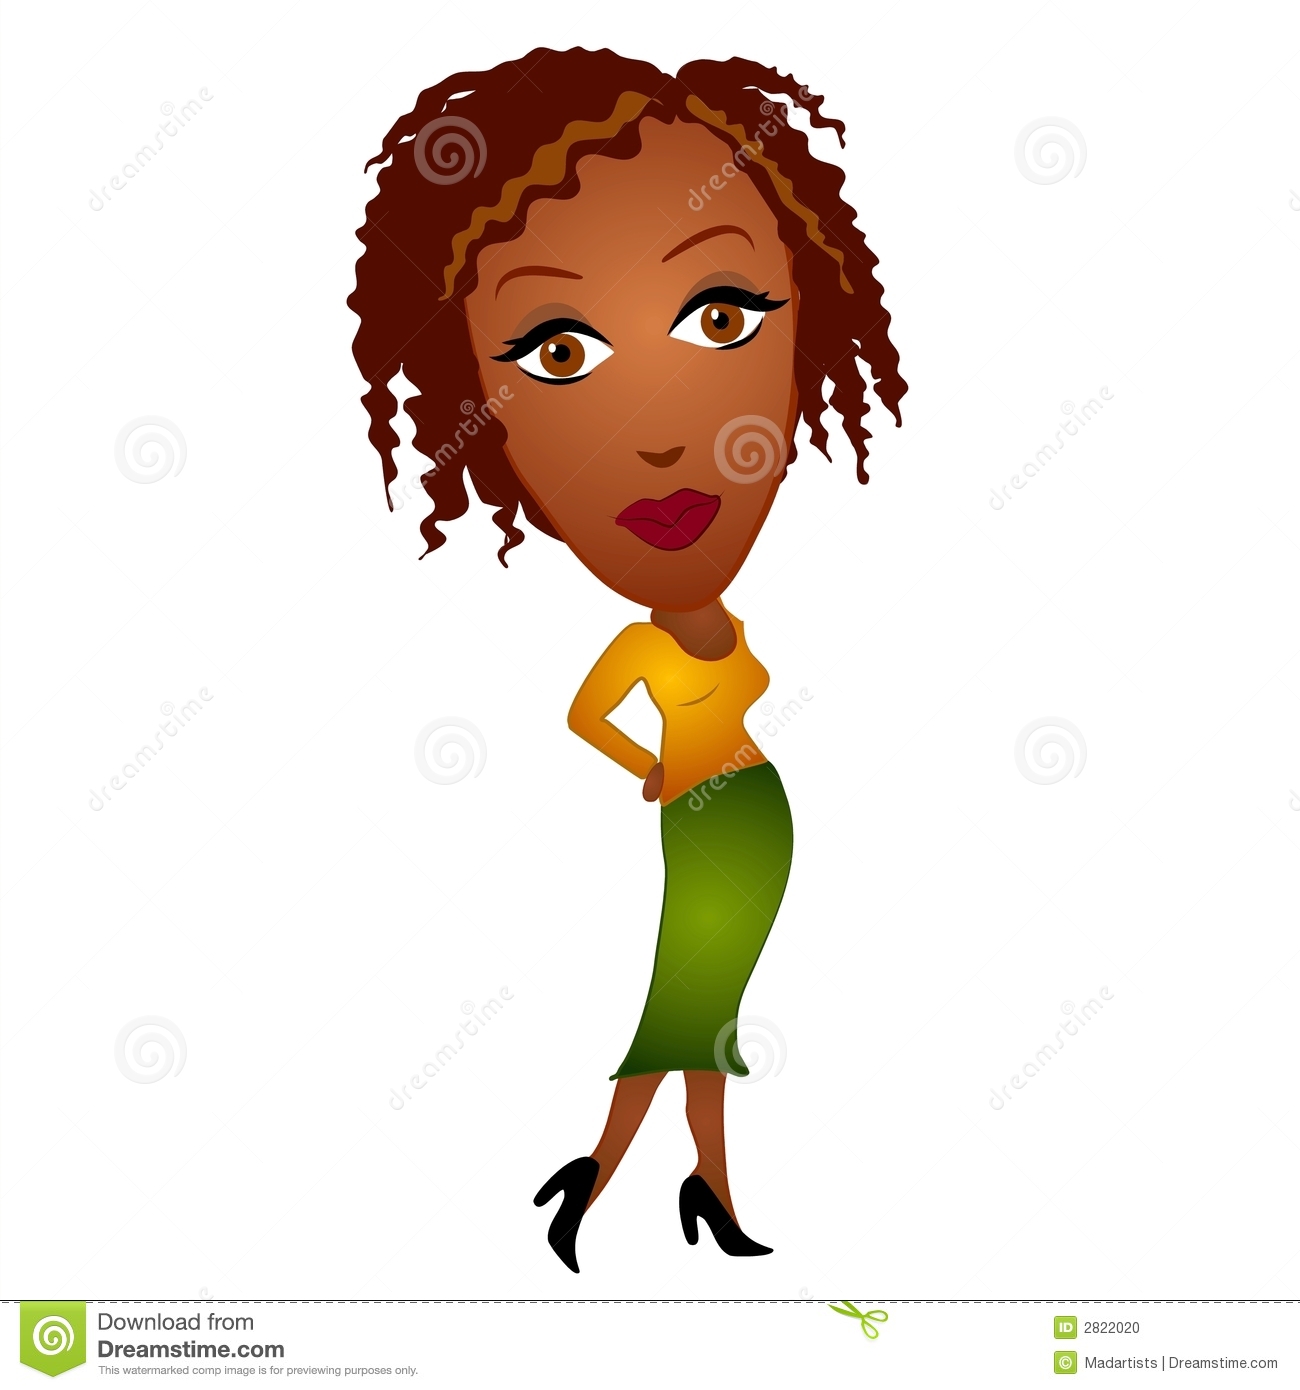 Clip Art Illustration Of An African American Woman Wearing A Yellow